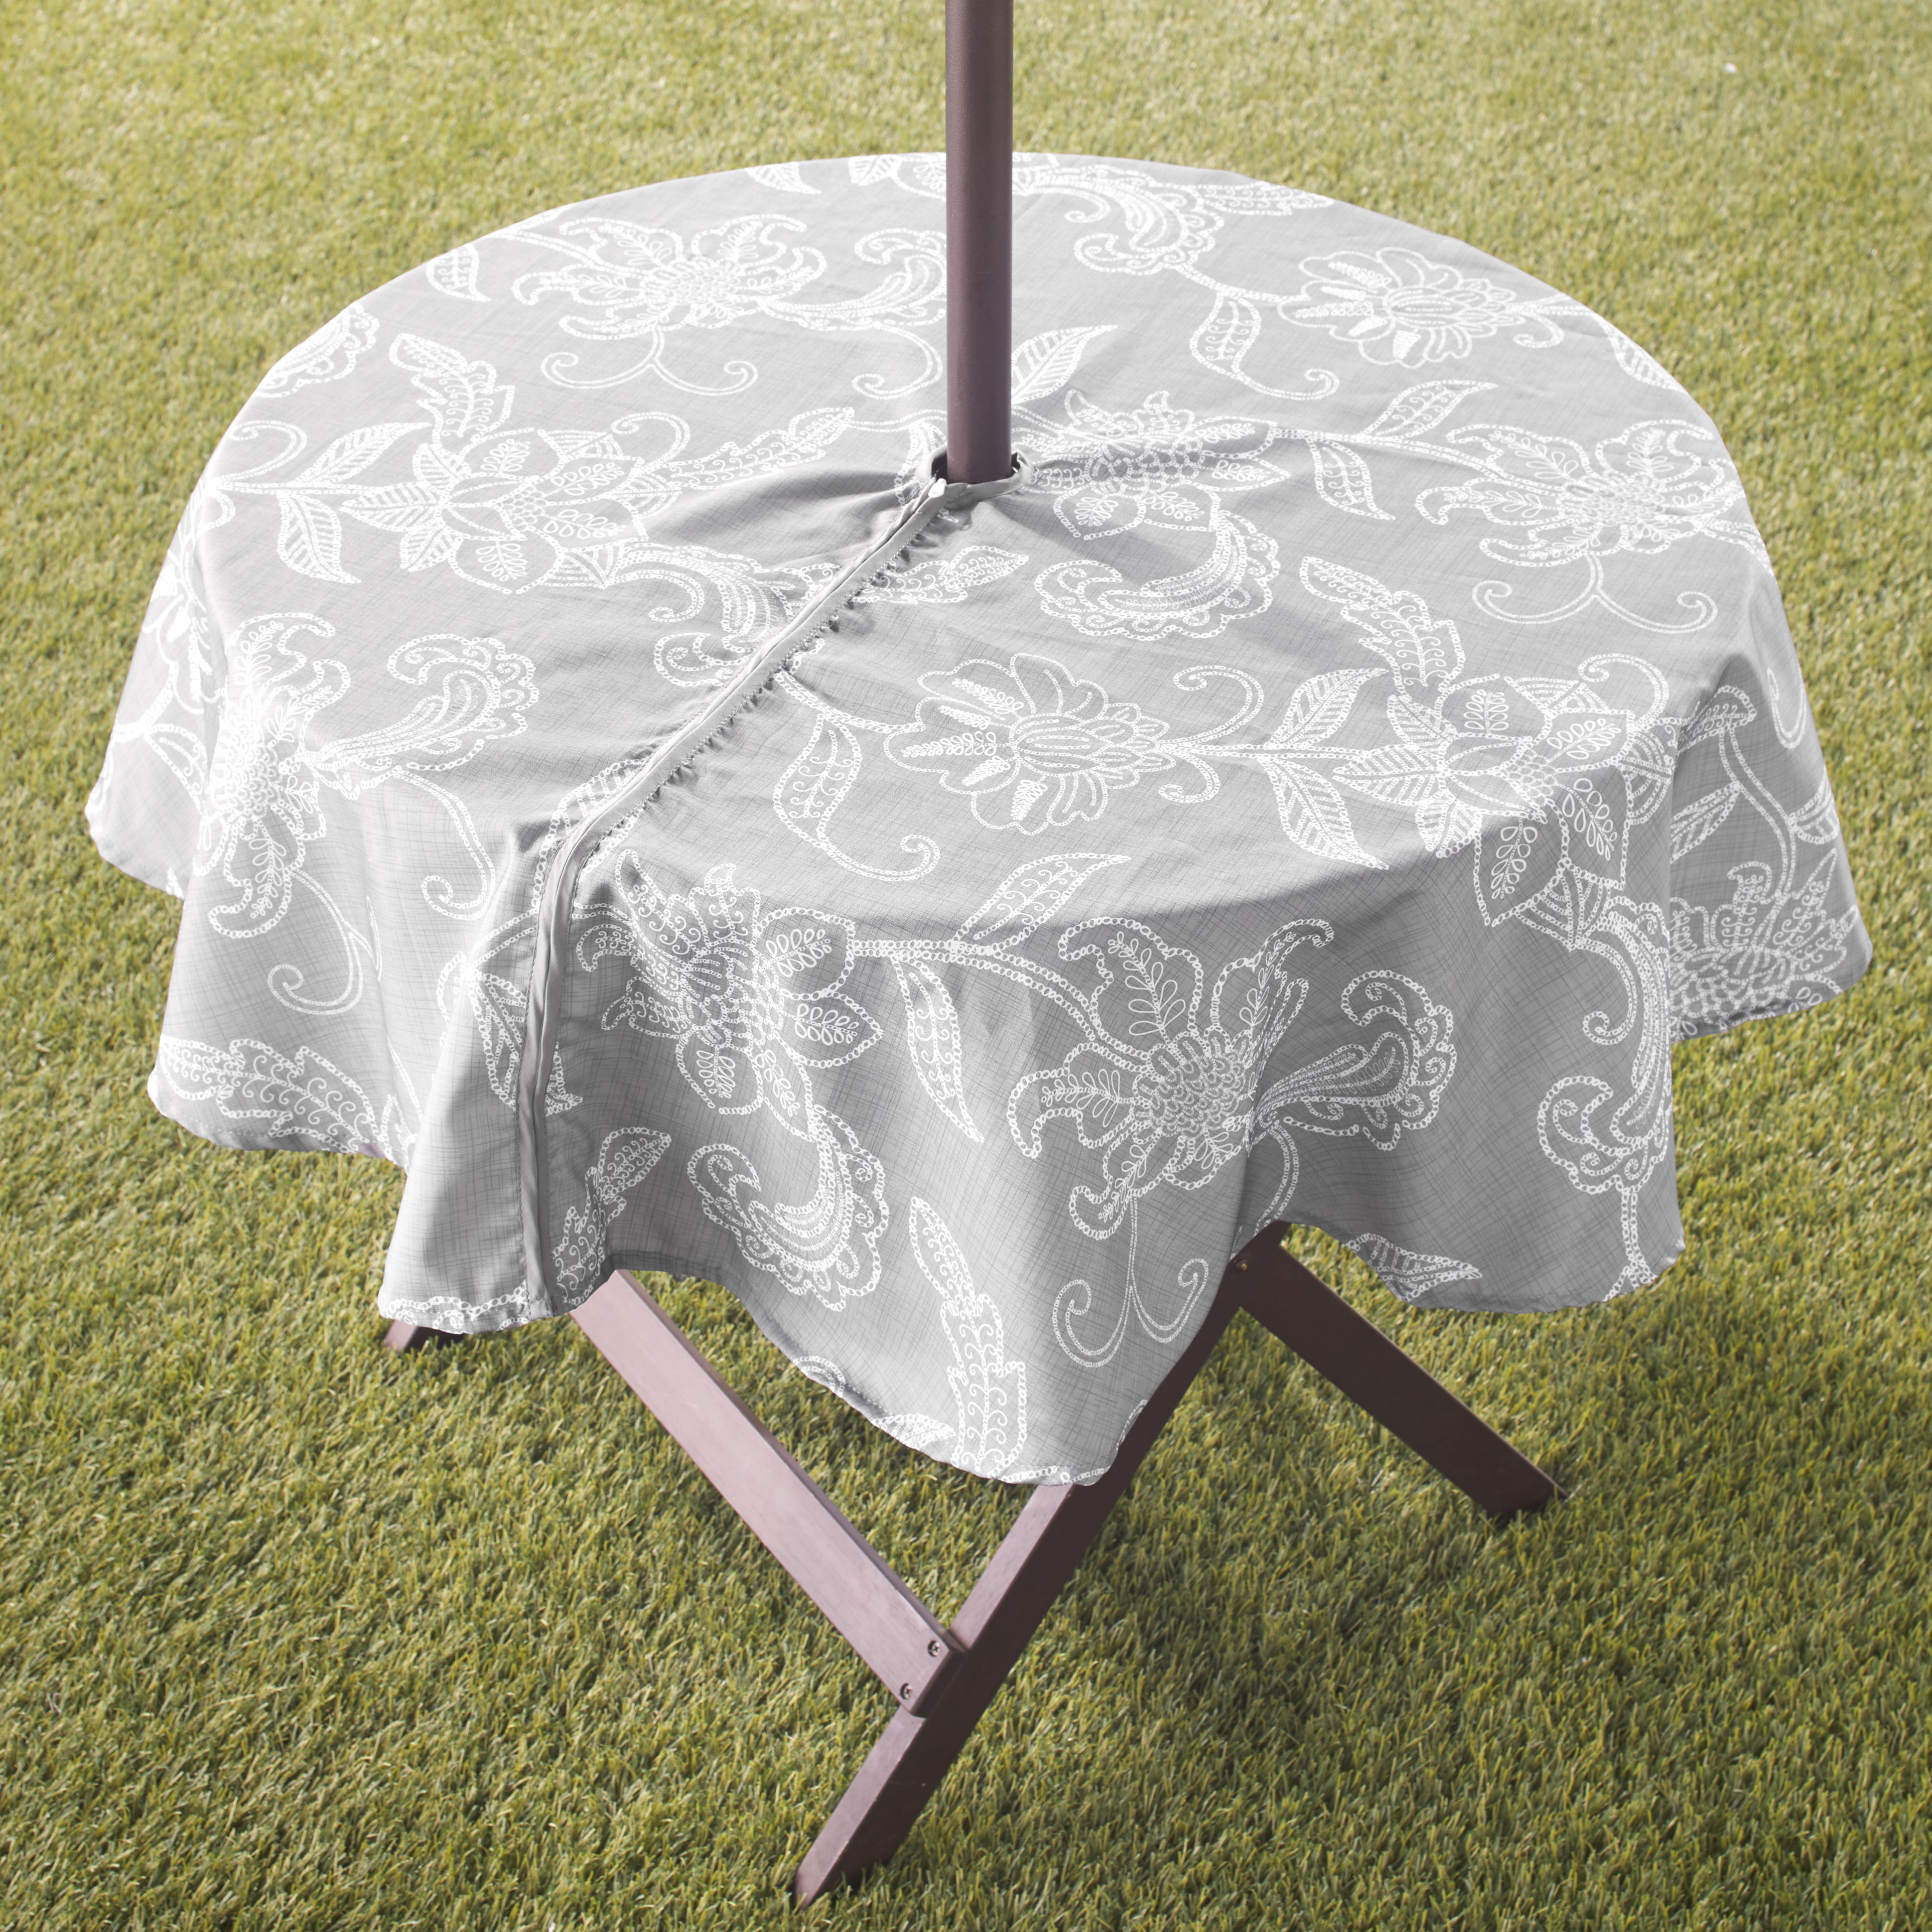 Outdoor Tablecloth With Umbrella Hole, White Round Tablecloth With Umbrella Hole